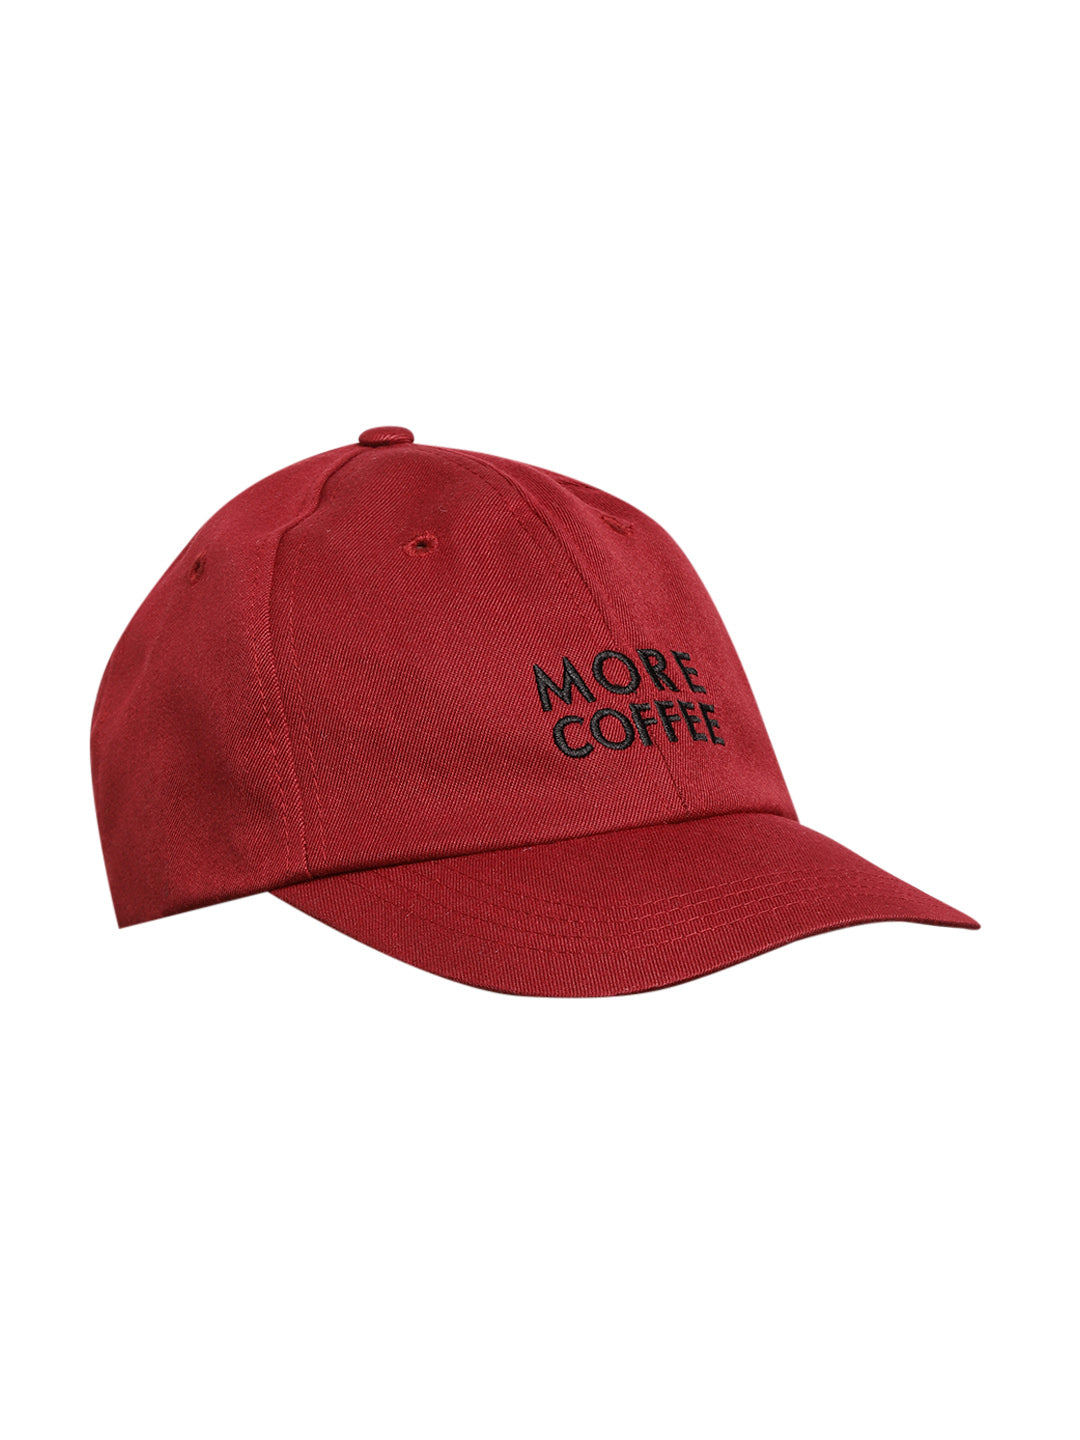 Maroon more coffee embriodery detailing baseball cap